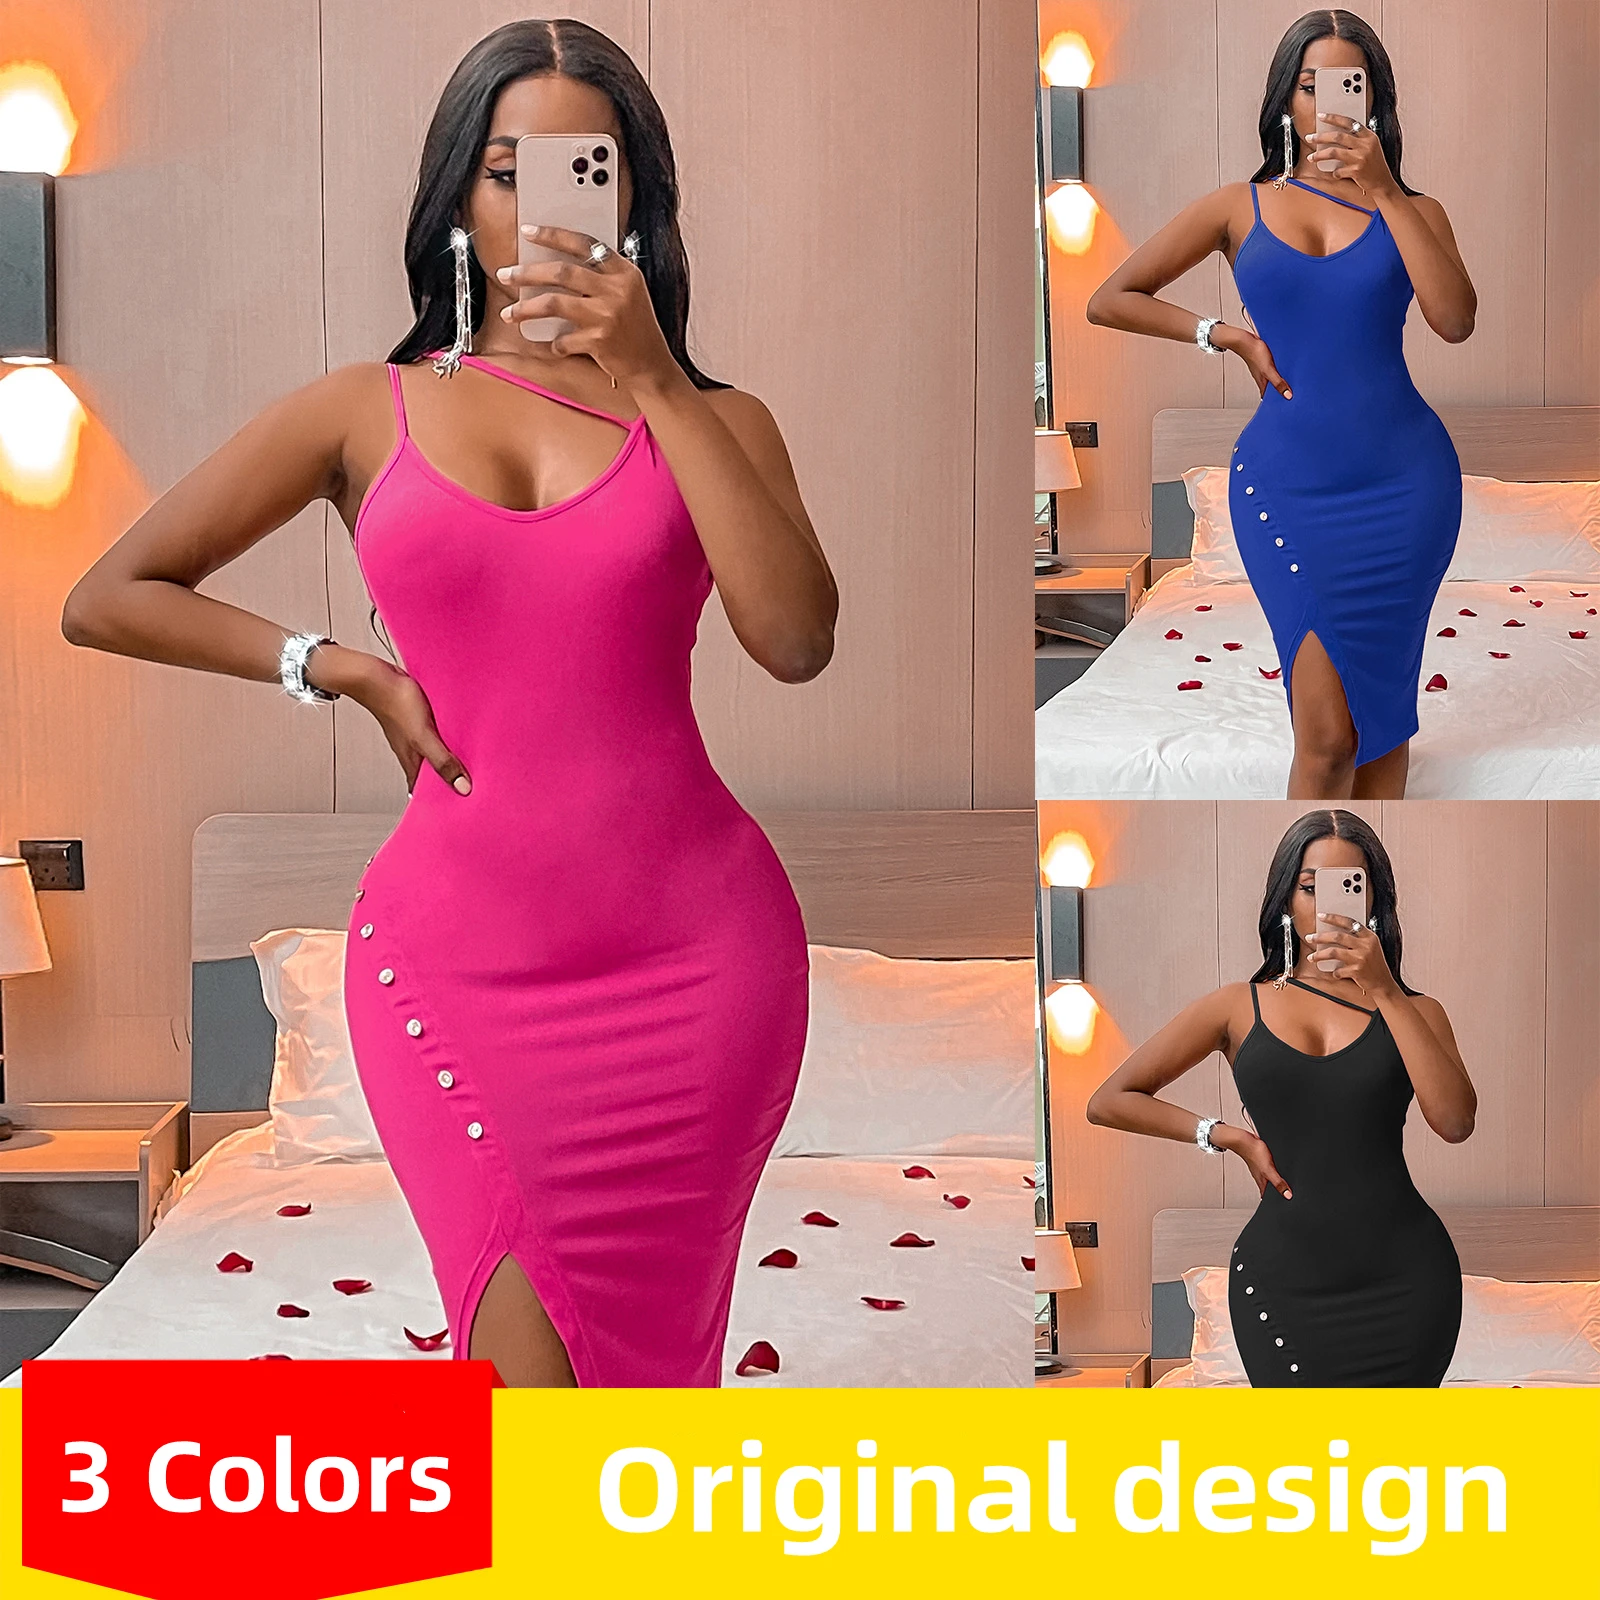 

New Women's Clothing Summer Slinky Suspenders Dress Lady Hollow Out Side Slit Slip Dresses Girl Maid Fashion Sexy Backless Skirt